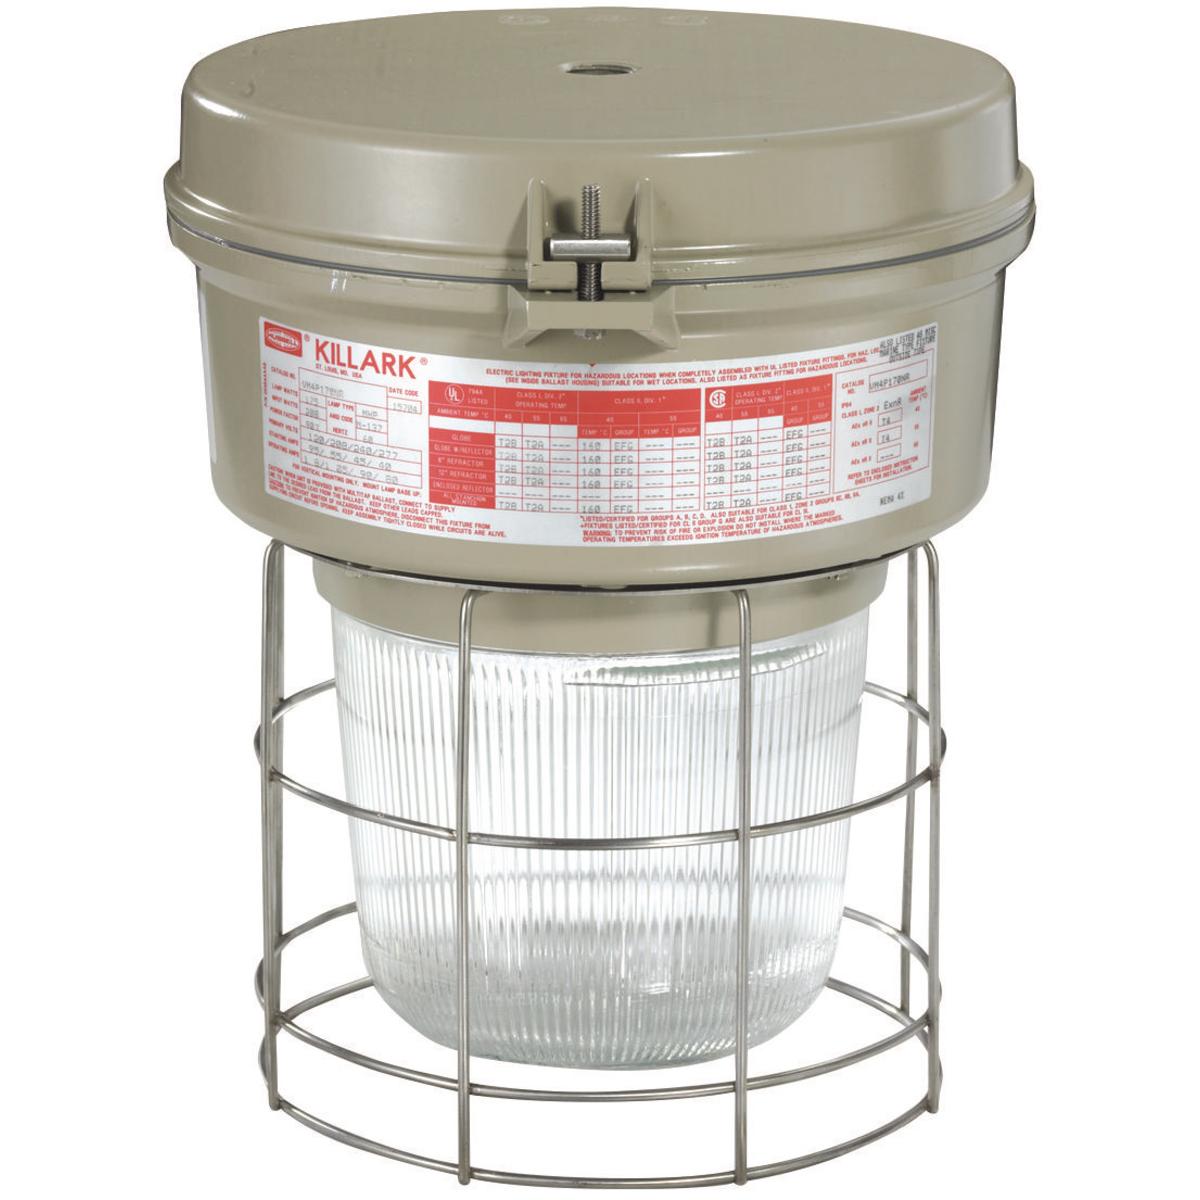 Hubbell VM4P175A2R5G VM4 Series - 175W Metal Halide 480V - 3/4" Pendant - Type V Glass Refractor and Guard  ; Ballast tank and splice box – corrosion resistant copper-free aluminum alloy with baked powder epoxy/polyester finish, electrostatically applied for complete, uniform